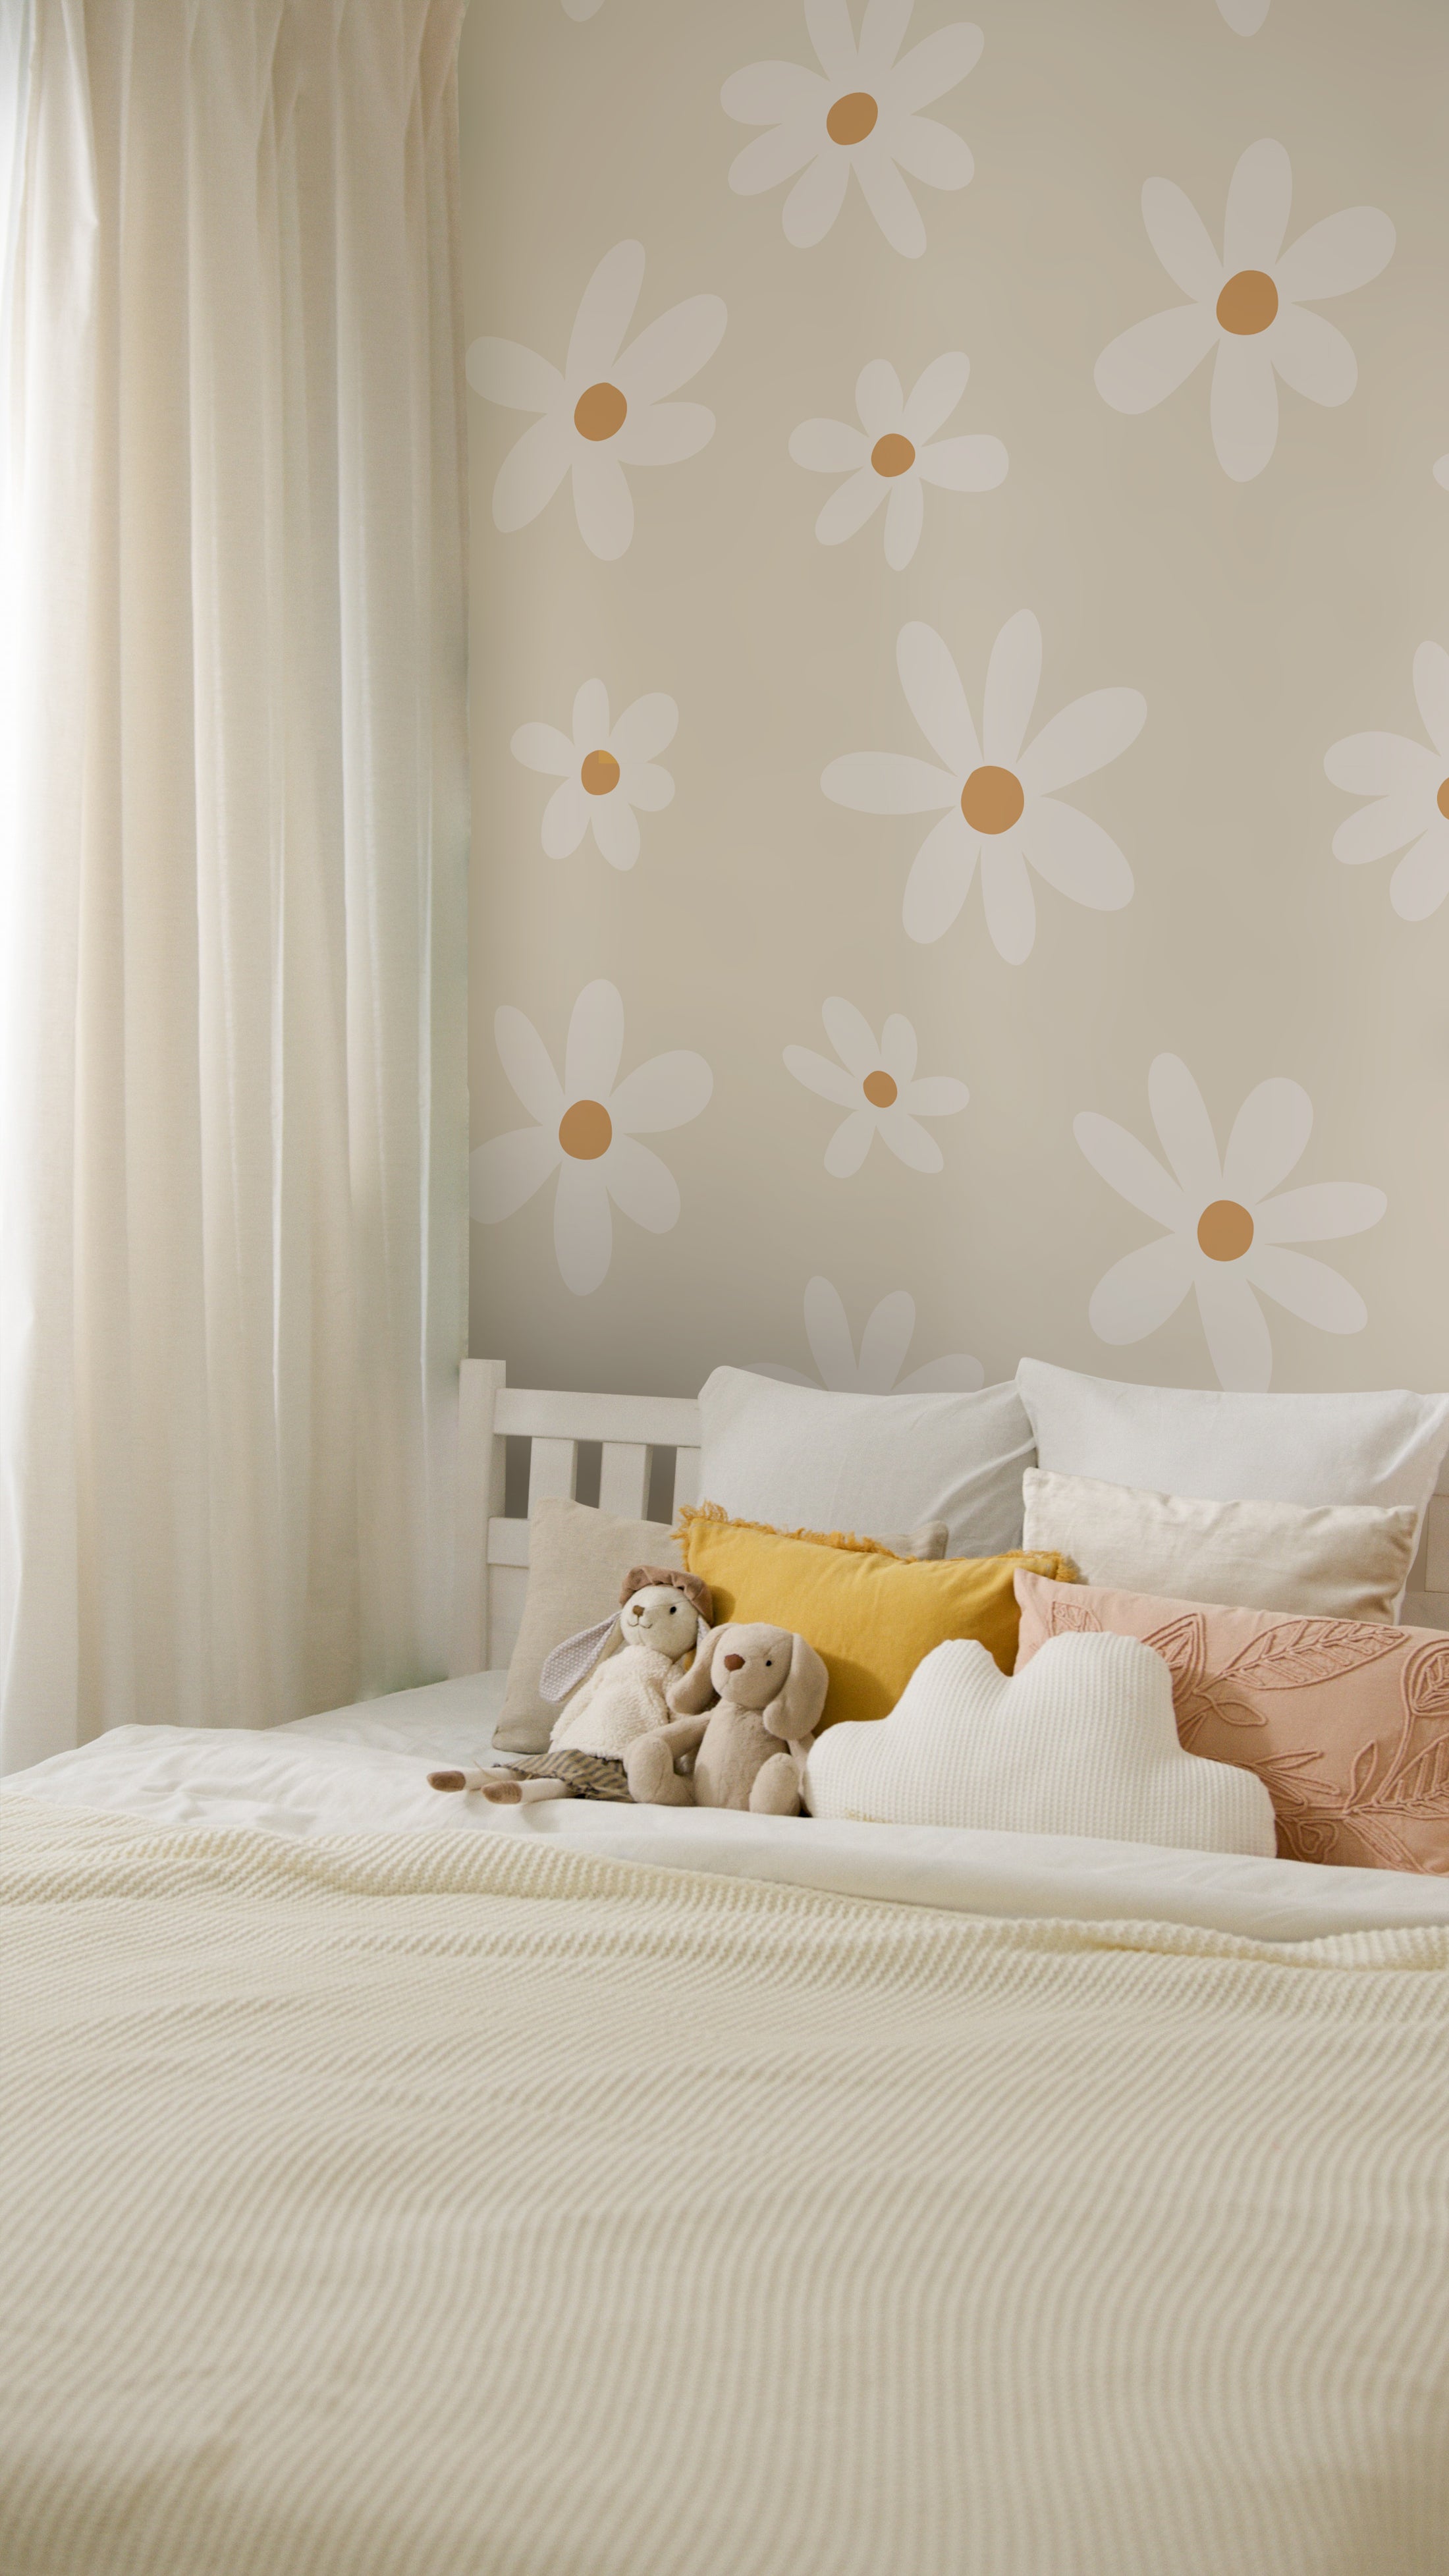 A cozy bedroom setting highlighting the Simple Daisy Wallpaper, creating a cheerful and inviting ambiance with its pattern of white daisies against an ecru background. The bed is dressed in neutral tones, accompanied by plush toys, evoking a sense of comfort and playfulness.